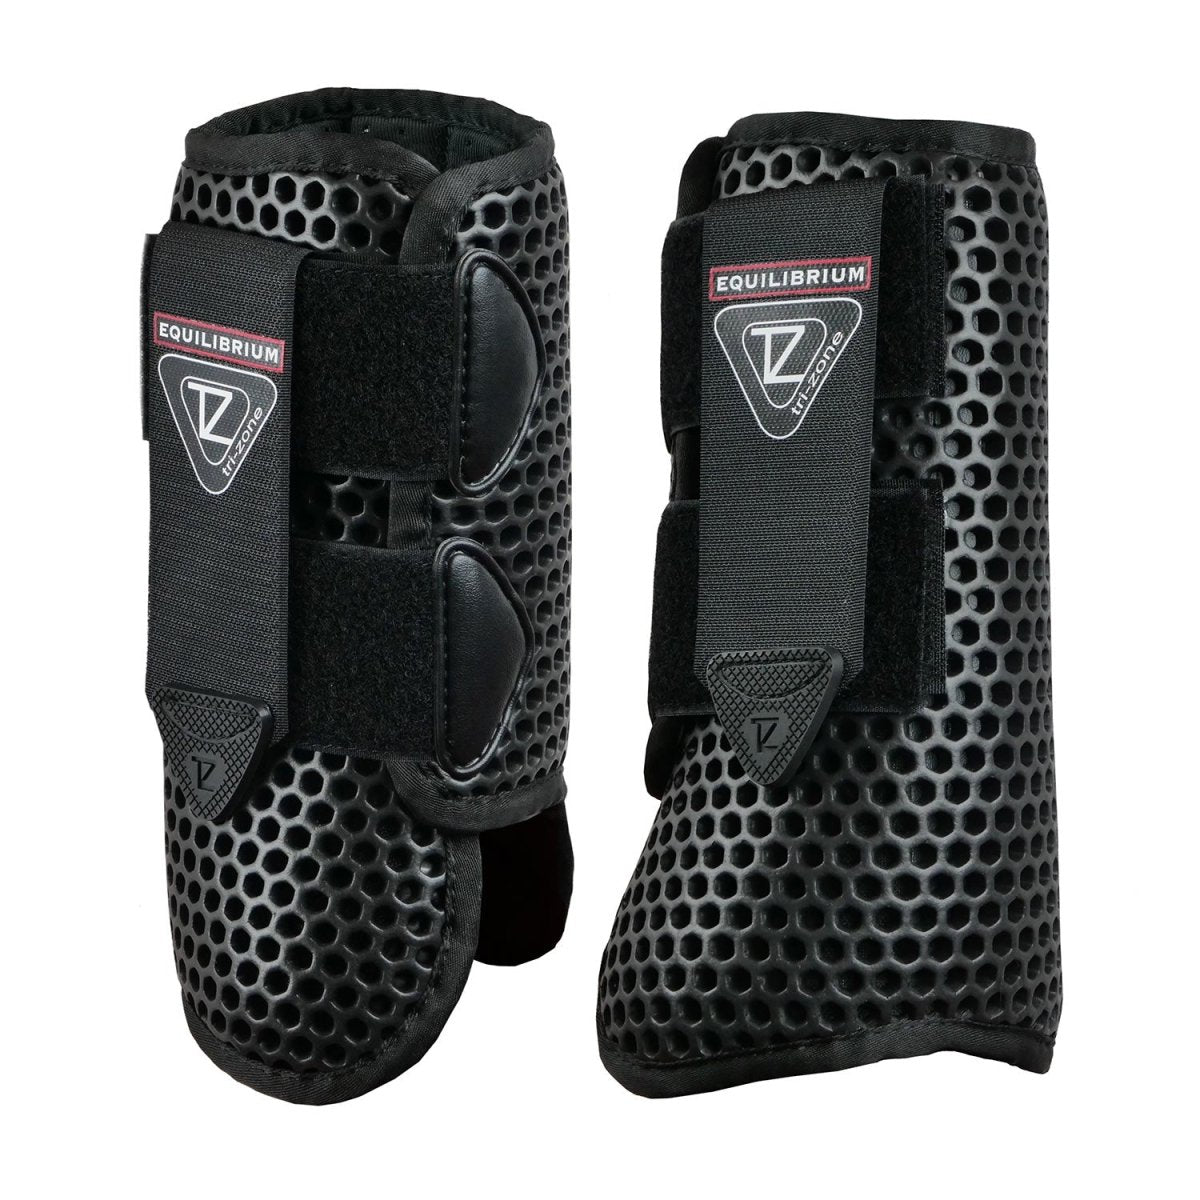 Equilibrium Tri-Zone All Sports Boots - Black - Small